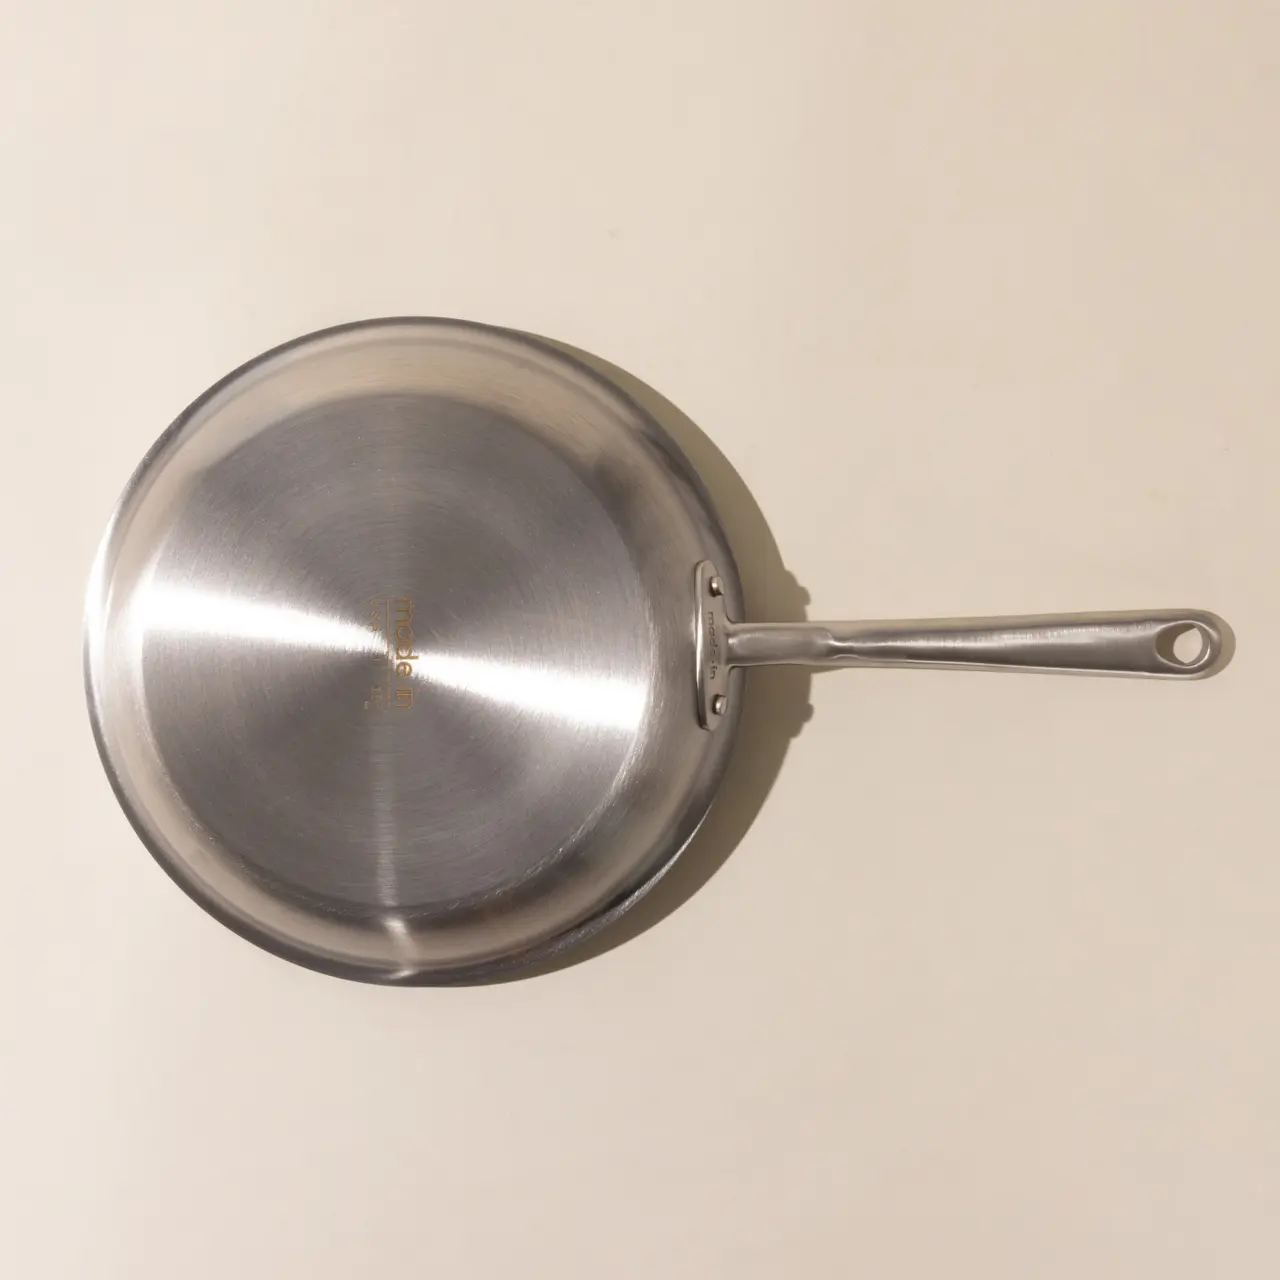 A stainless steel skillet with a long handle viewed from above on a beige background.